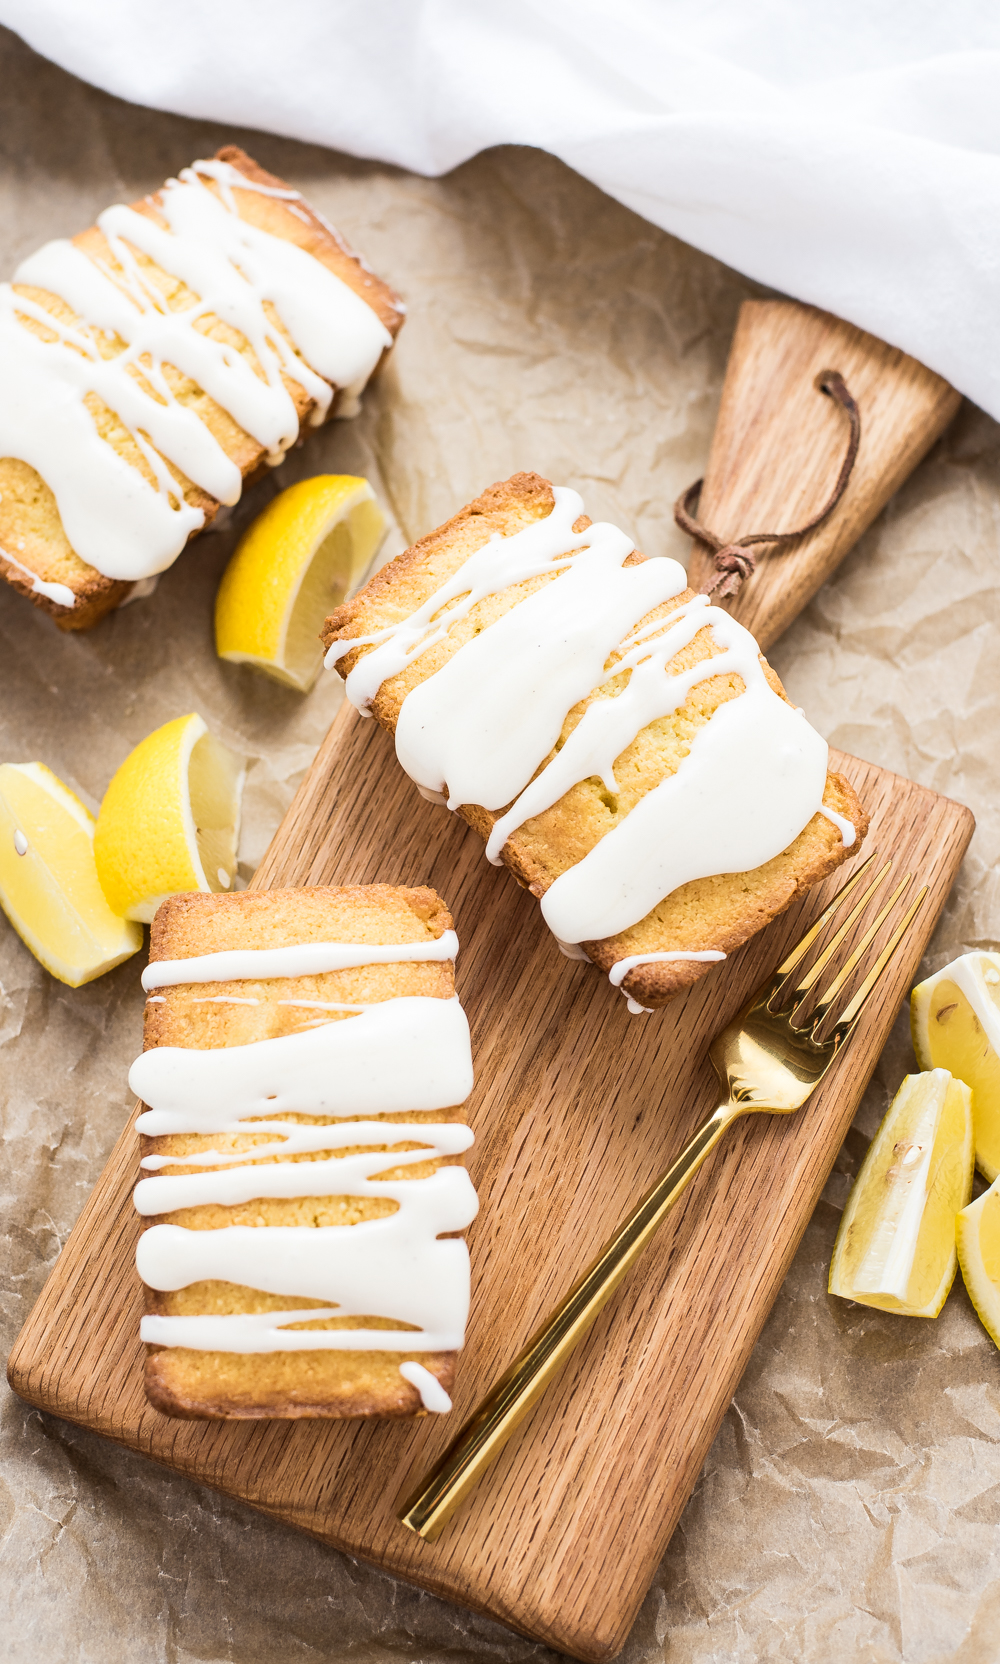 Mini Lemon Pound Cakes are sweet little cakes that can satisfy just about anyone's sweet tooth!